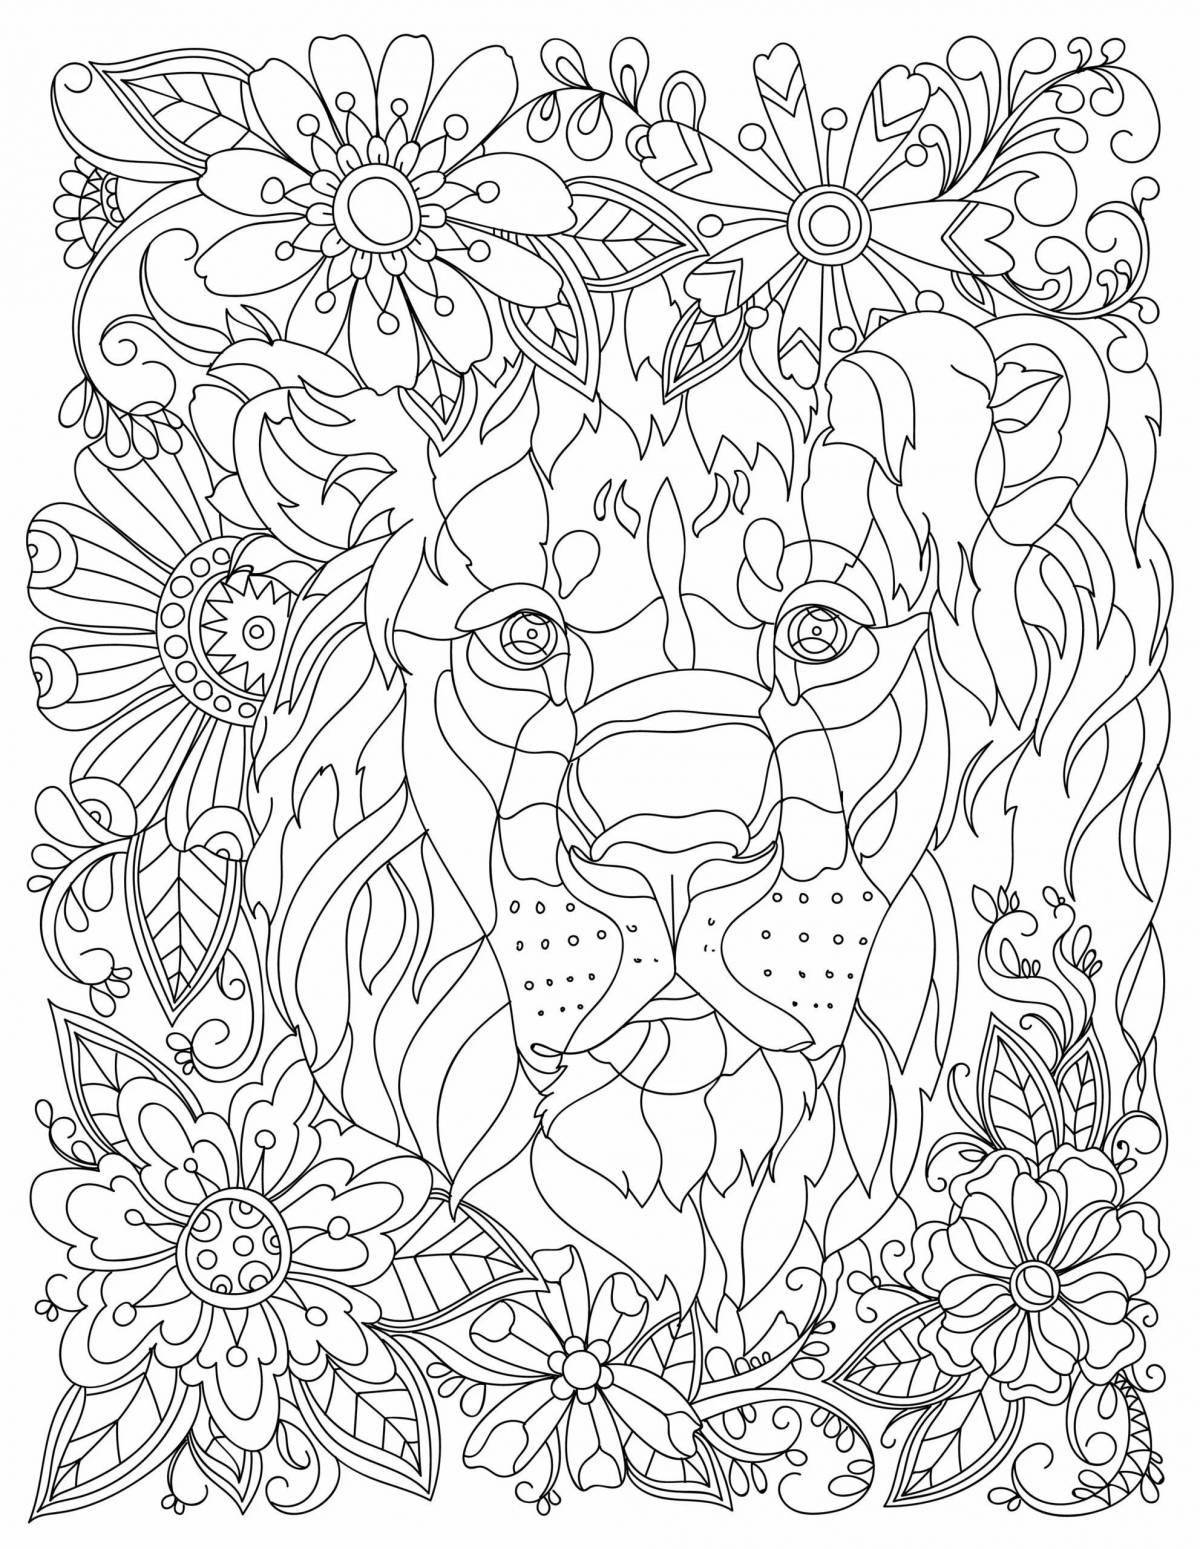 Anxiety coloring book for children